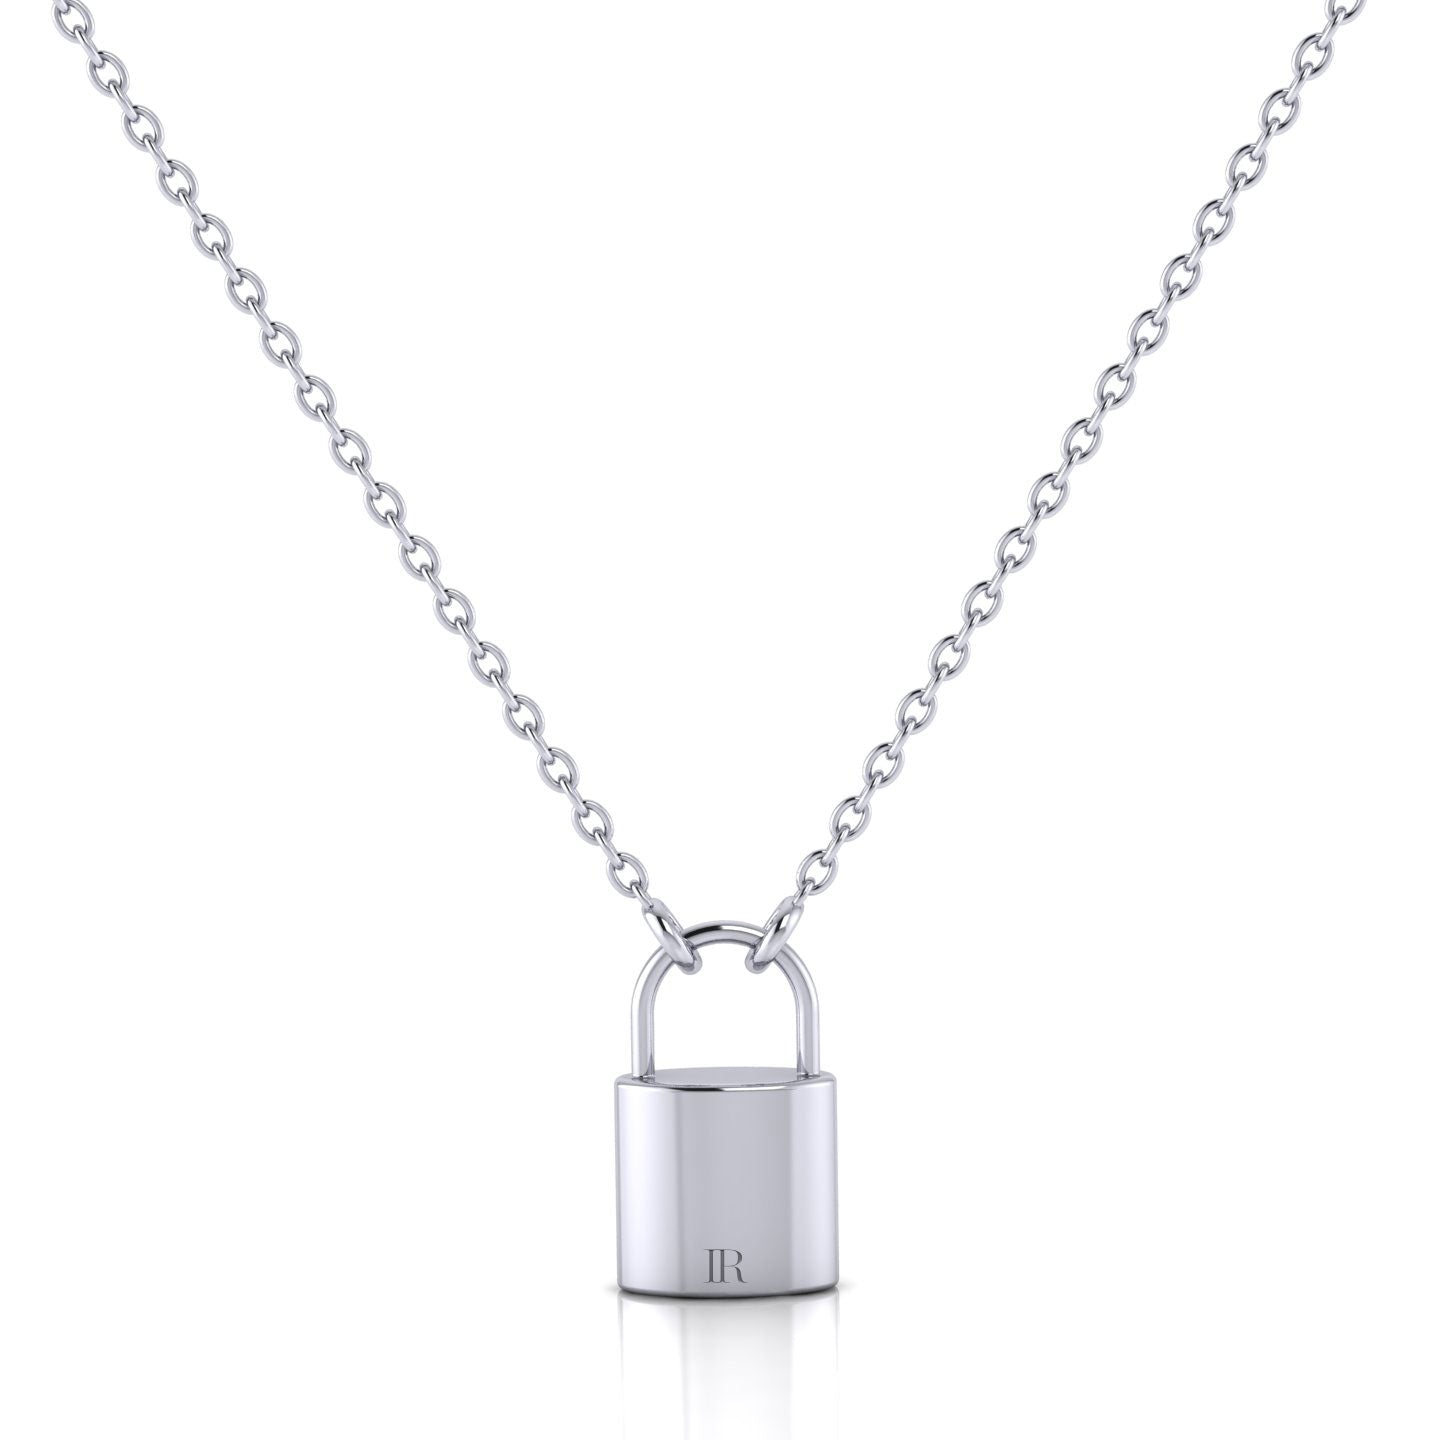 Back view of the Emory Padlock Pendant in sterling silver, showcasing its fine craftsmanship and lustrous sterling silver surface.